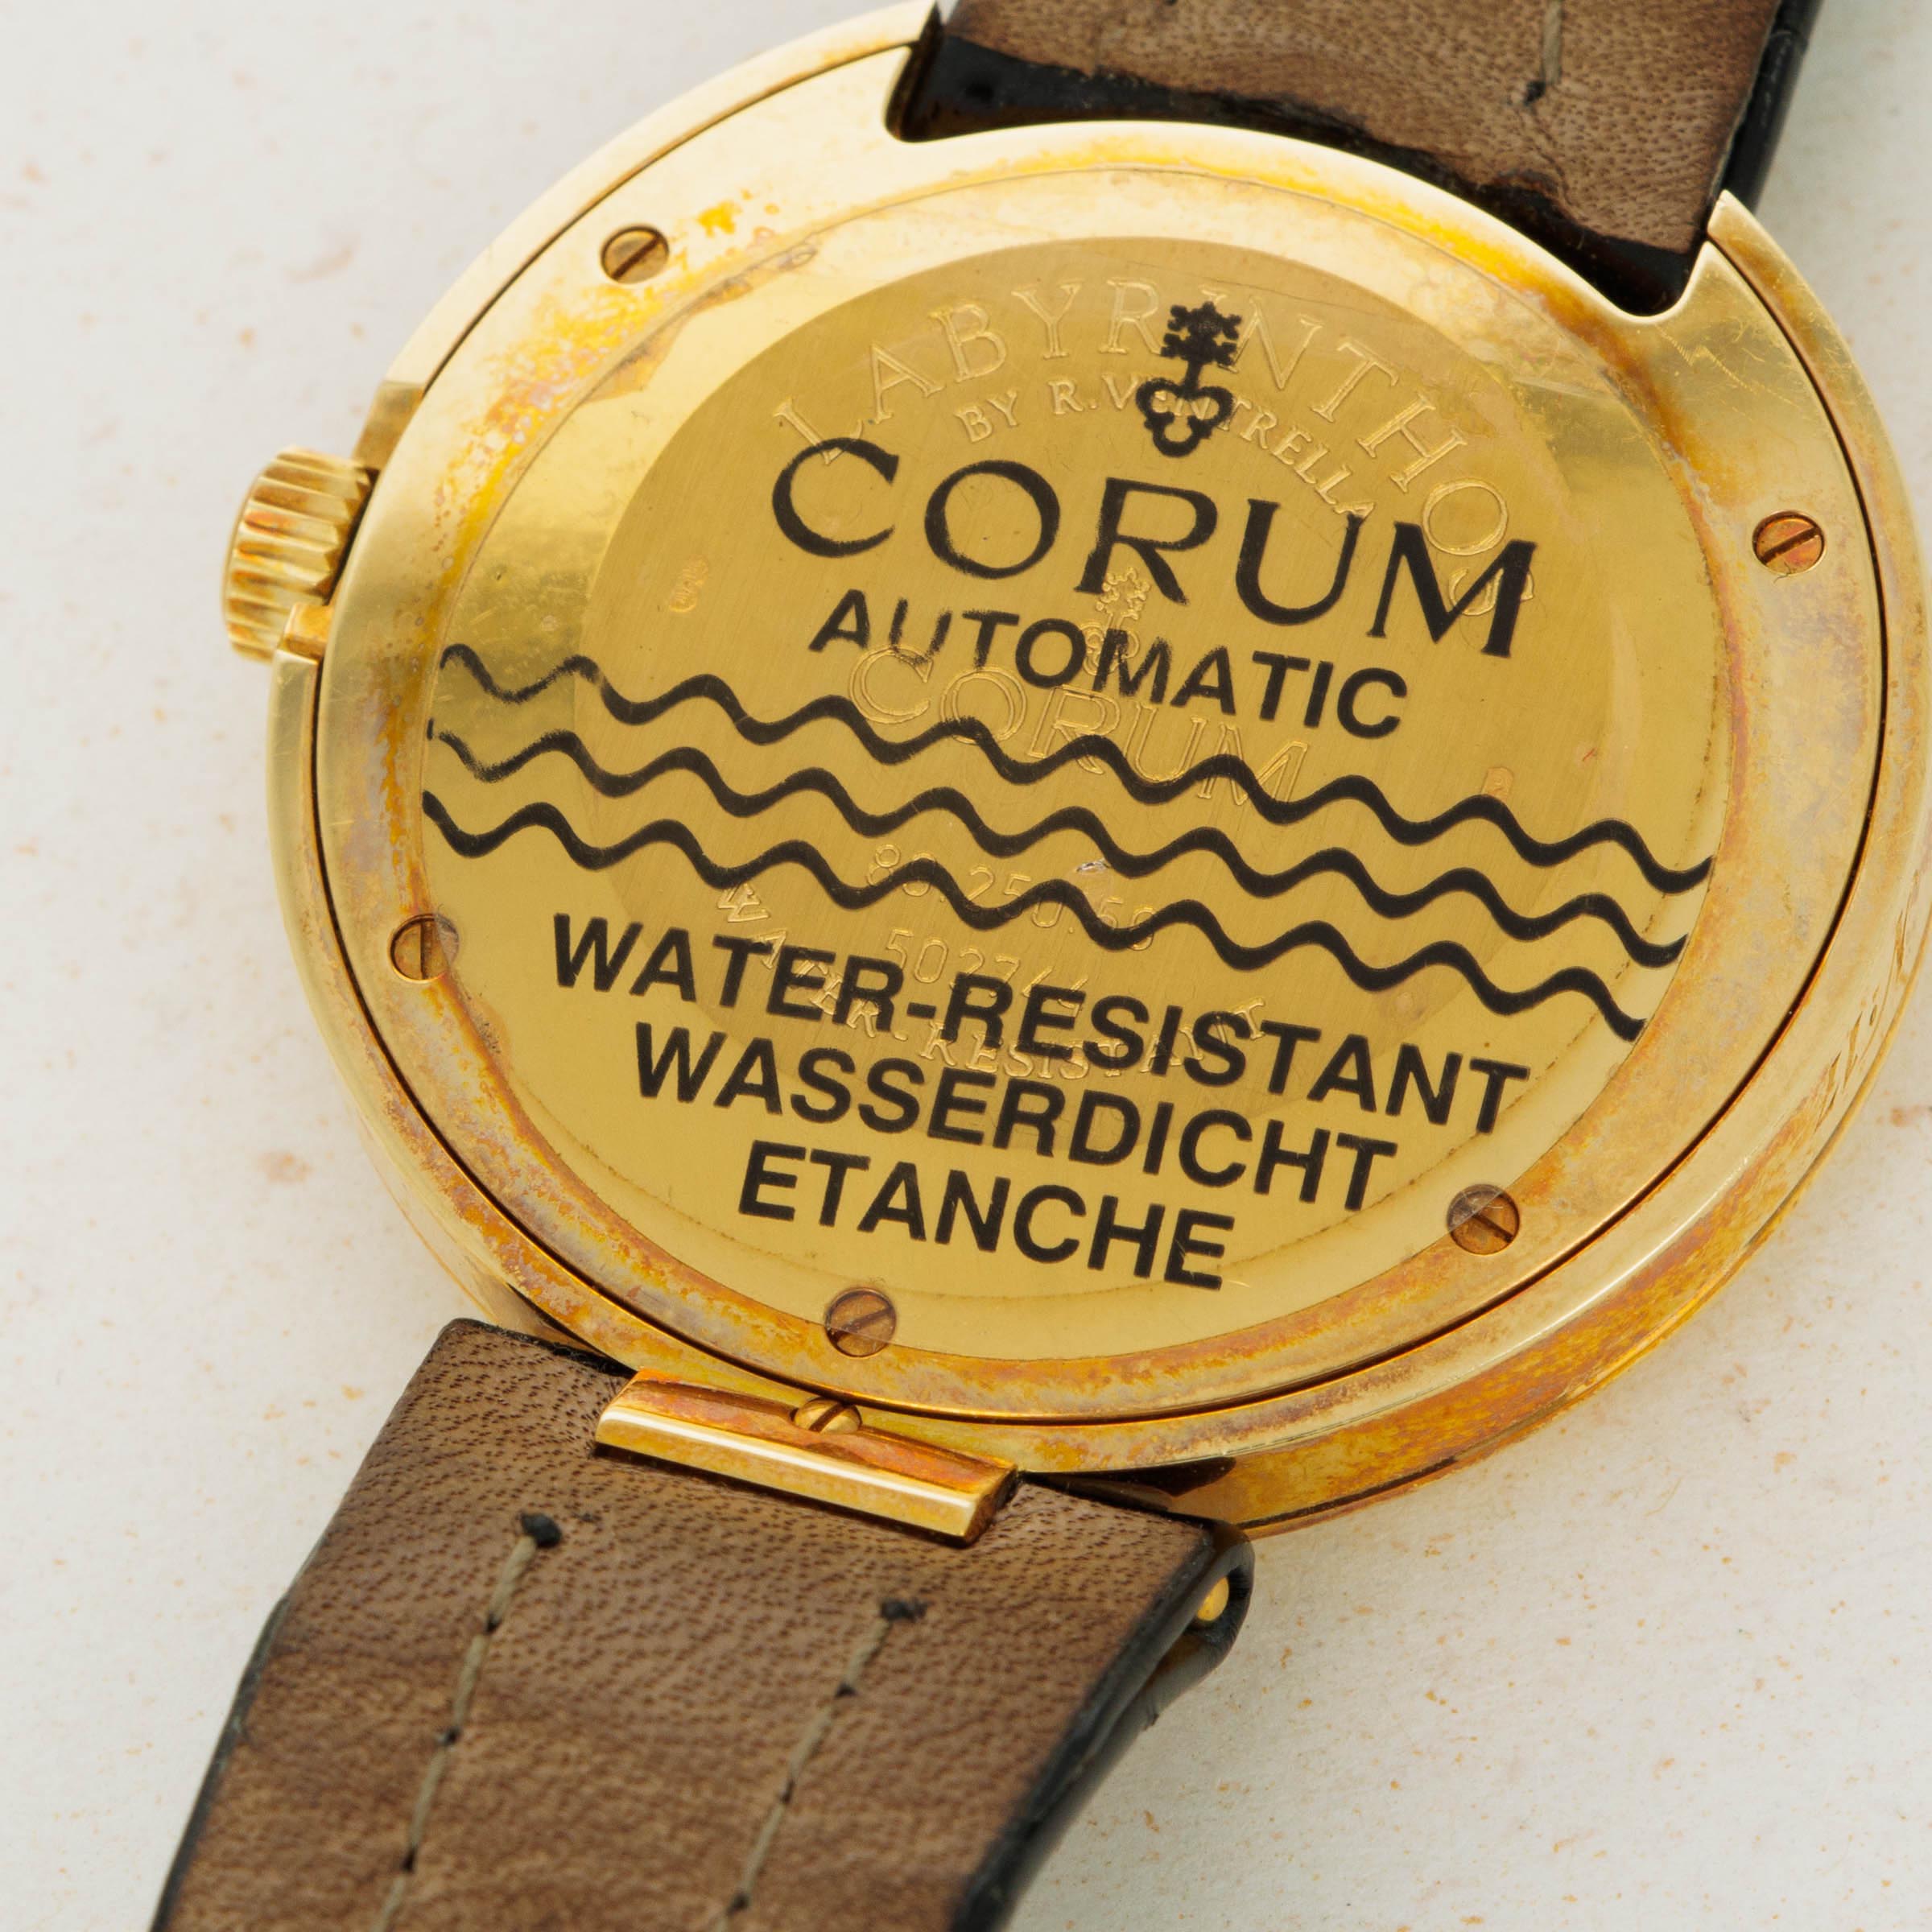 Corum Labyrinthos by R. Ventrella | Auctions | Loupe This